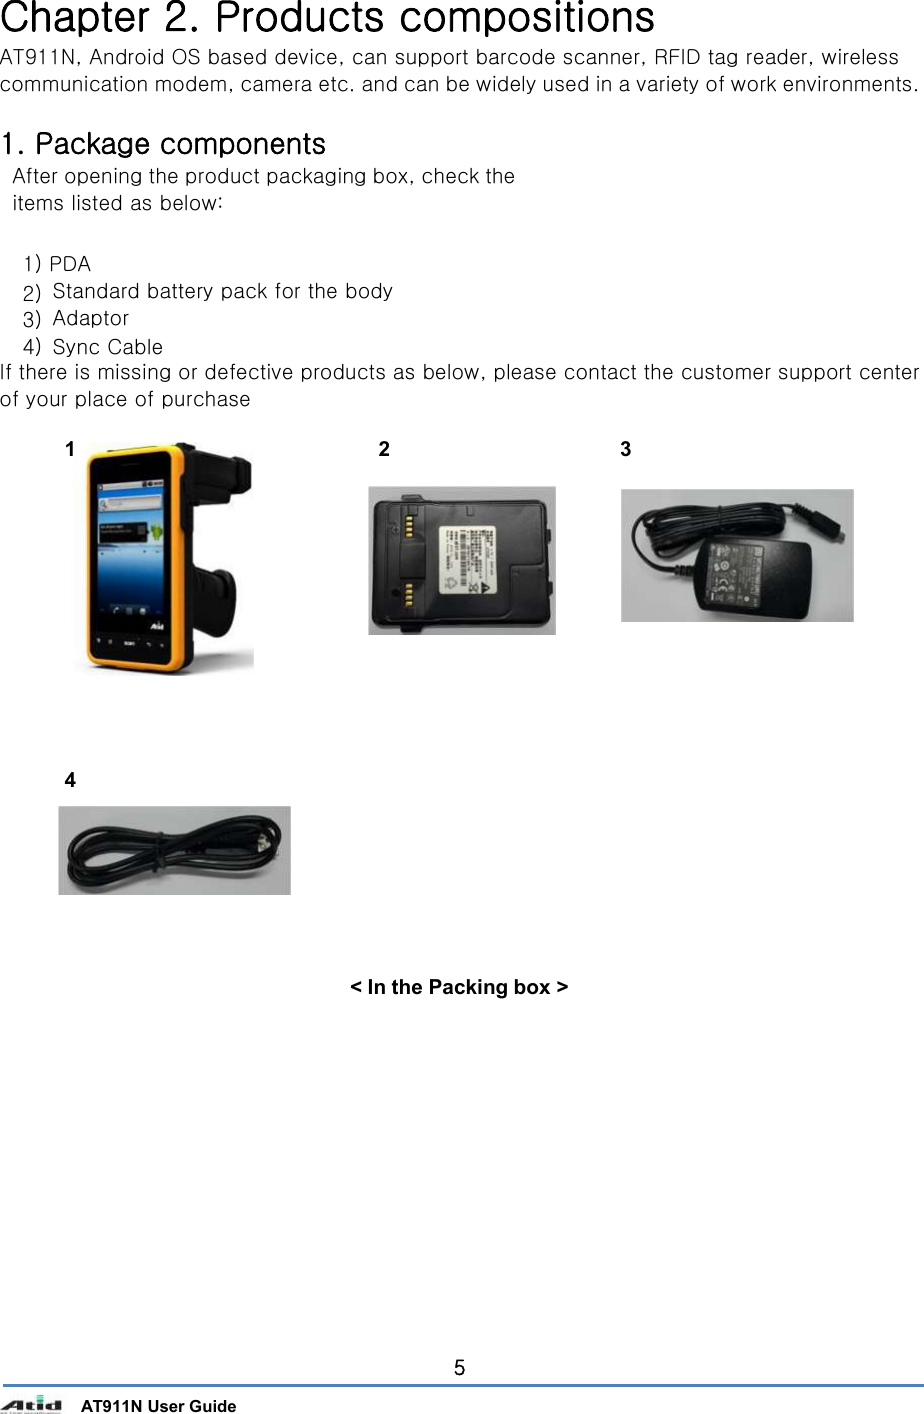       AT911N User Guide 5 Chapter 2. Products compositions AT911N, Android OS based device, can support barcode scanner, RFID tag reader, wireless communication modem, camera etc. and can be widely used in a variety of work environments.  1. Package components After opening the product packaging box, check the items listed as below:  1) PDA 2)  Standard battery pack for the body  3)  Adaptor 4)  Sync Cable If there is missing or defective products as below, please contact the customer support center of your place of purchase  1  2  3                 4             &lt; In the Packing box &gt;                